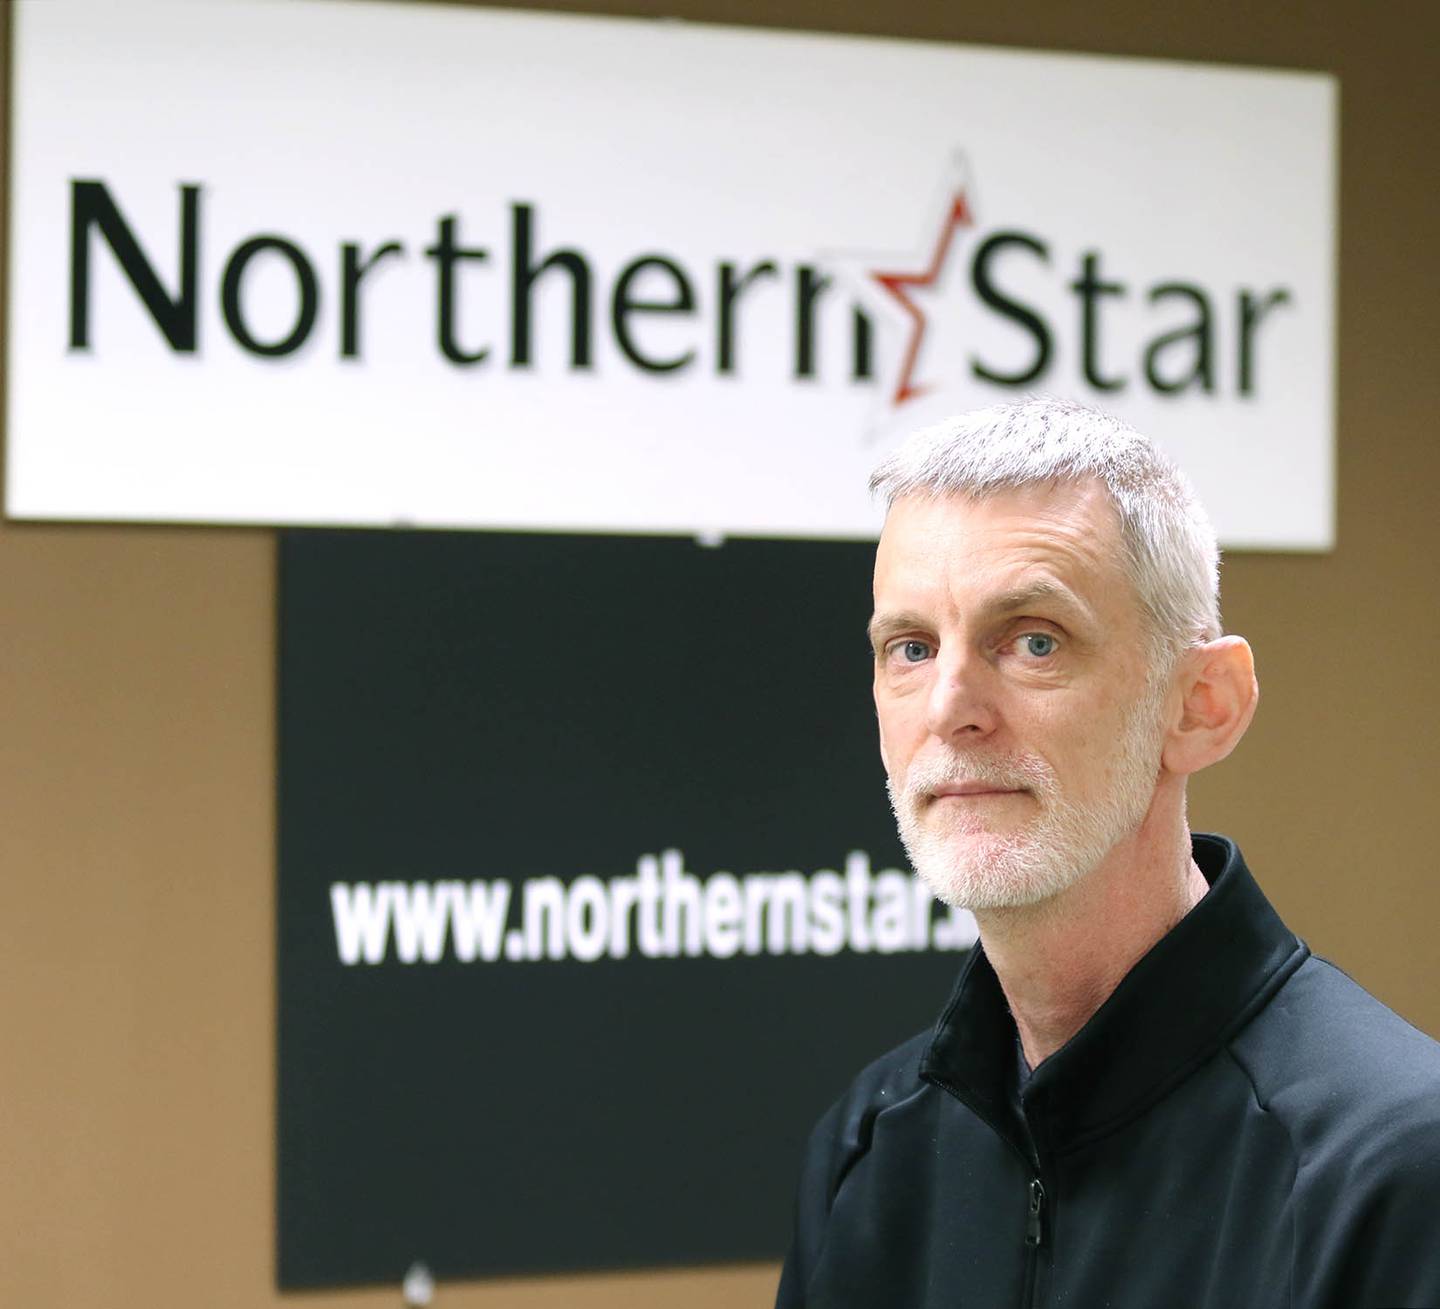 Former Northern Star Advisor Jim Killam in the Star office at the Peters Campus Life Building Monday, Feb. 13, 2023, at Northern Illinois University. Killam was the advisor at the student newspaper in 2008 when the shootings occurred at NIU.